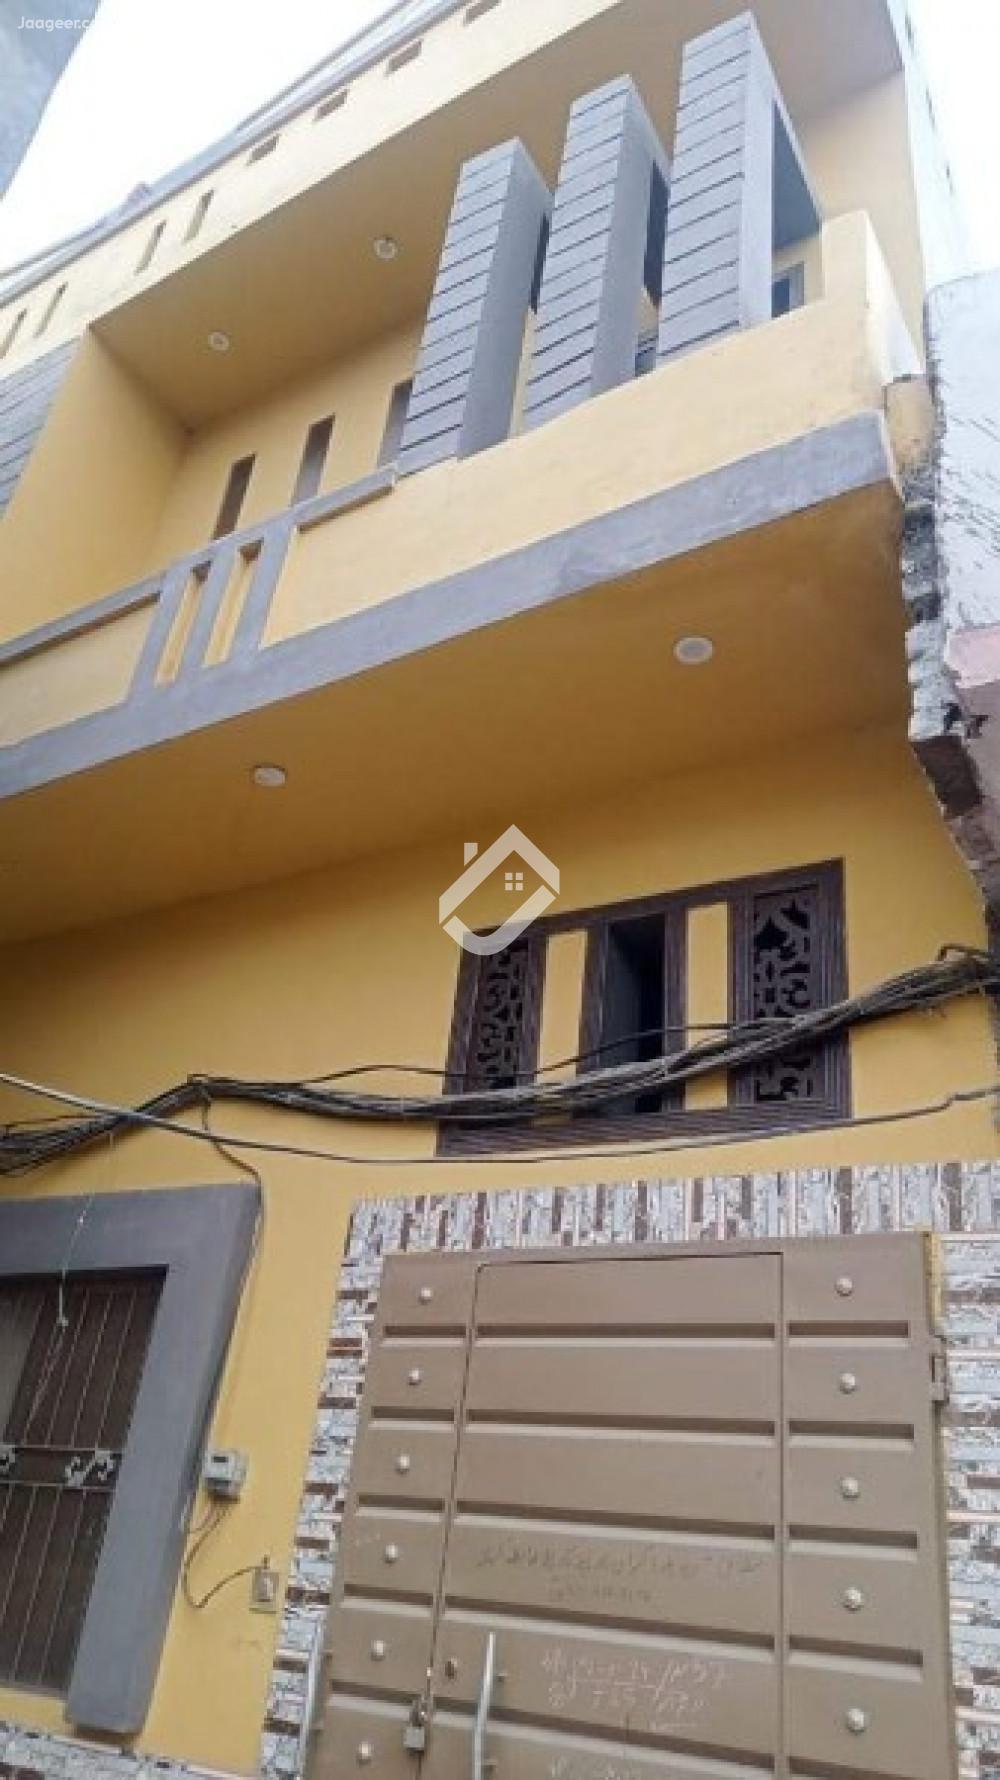 View  4 Marla House For Sale In Shareef Town Link Lahore Road Faisalabad Road  in Shareef Town, Sargodha